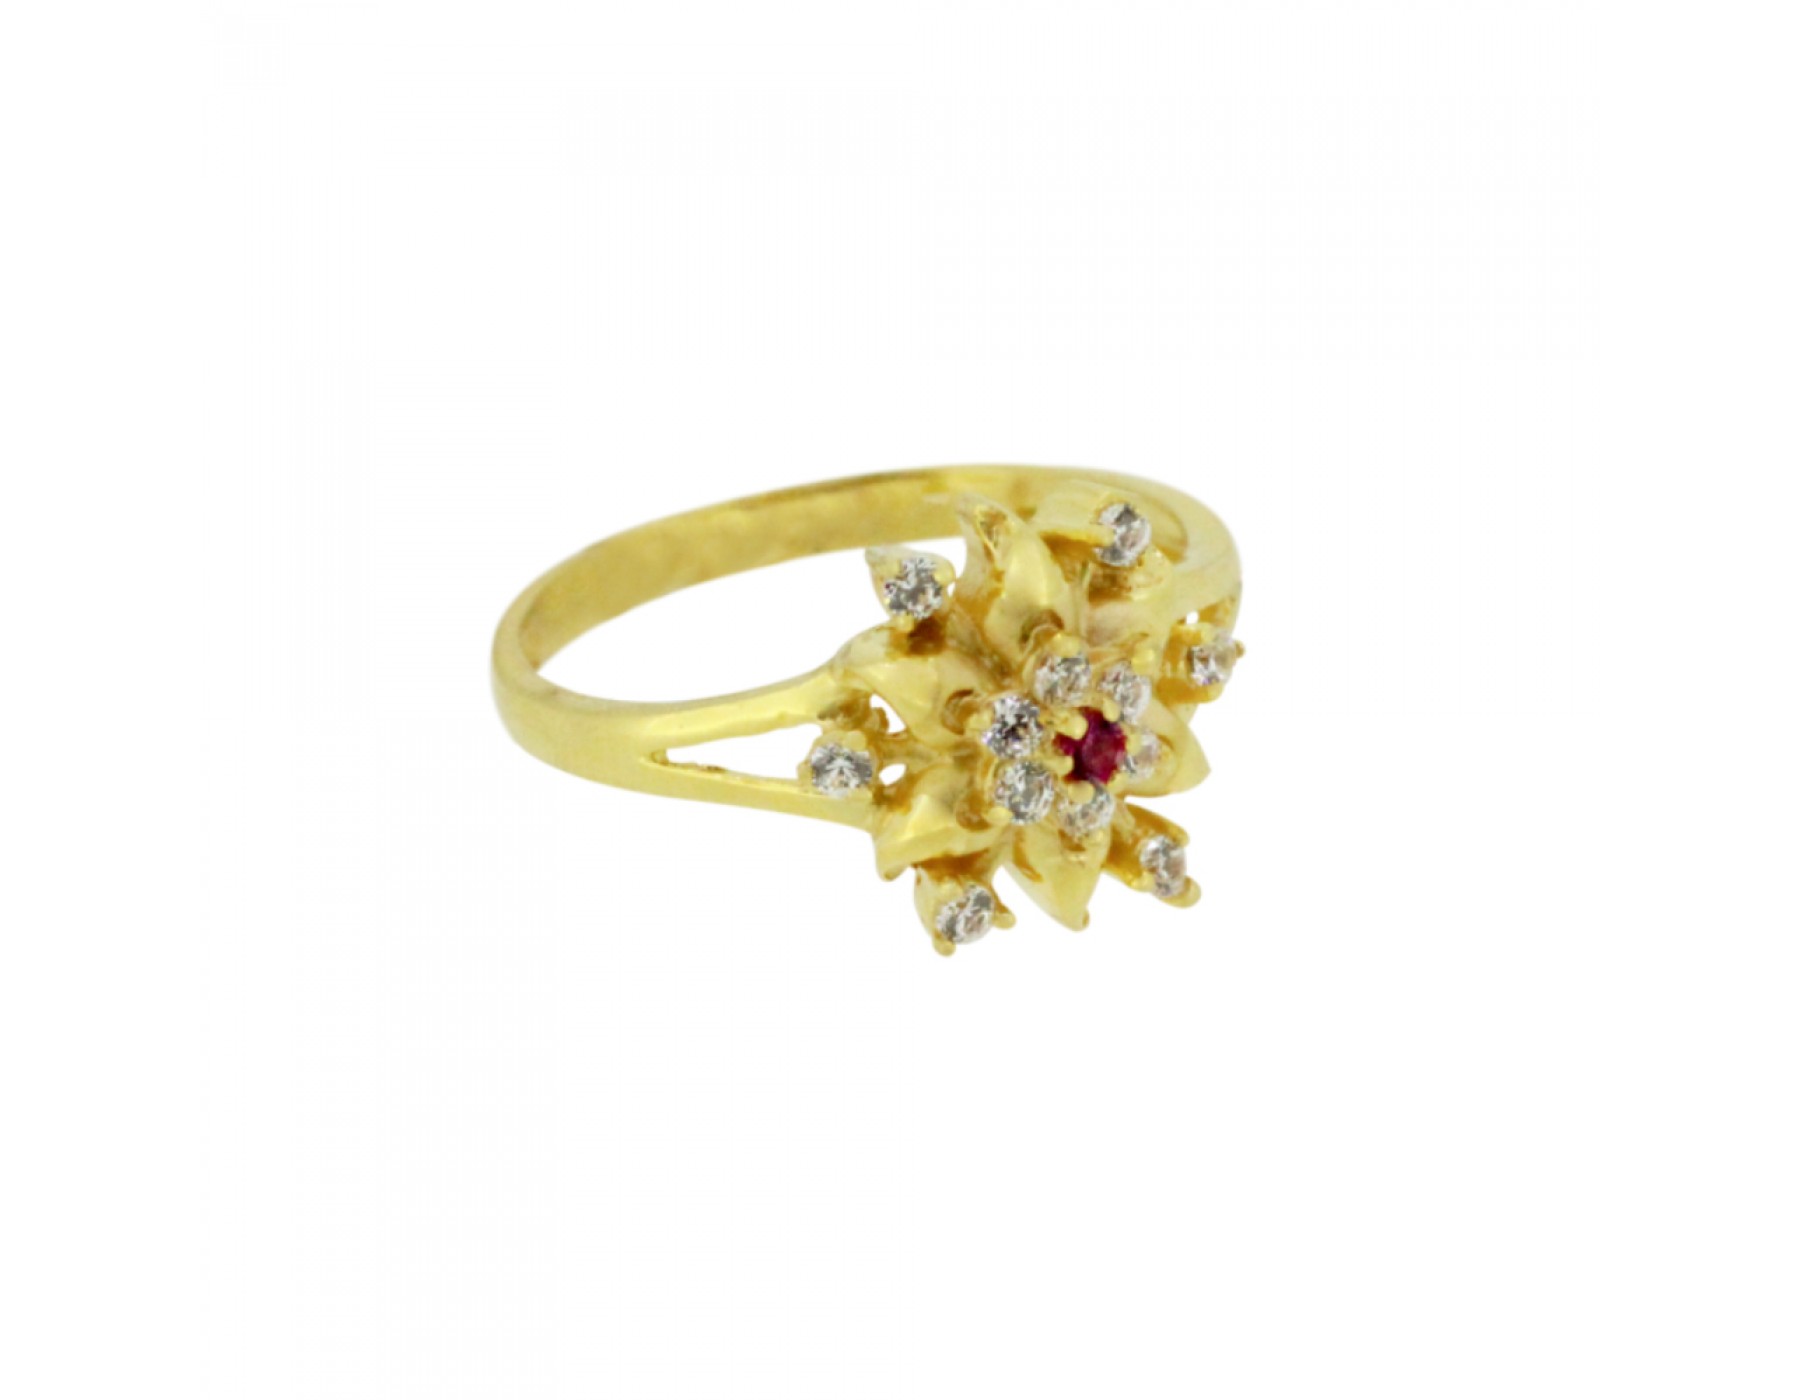 Buy 22k Gold Ring, Enameled Peacock Gold 22kt Gold, Indian Handmade Jewelry  Online in India - Etsy